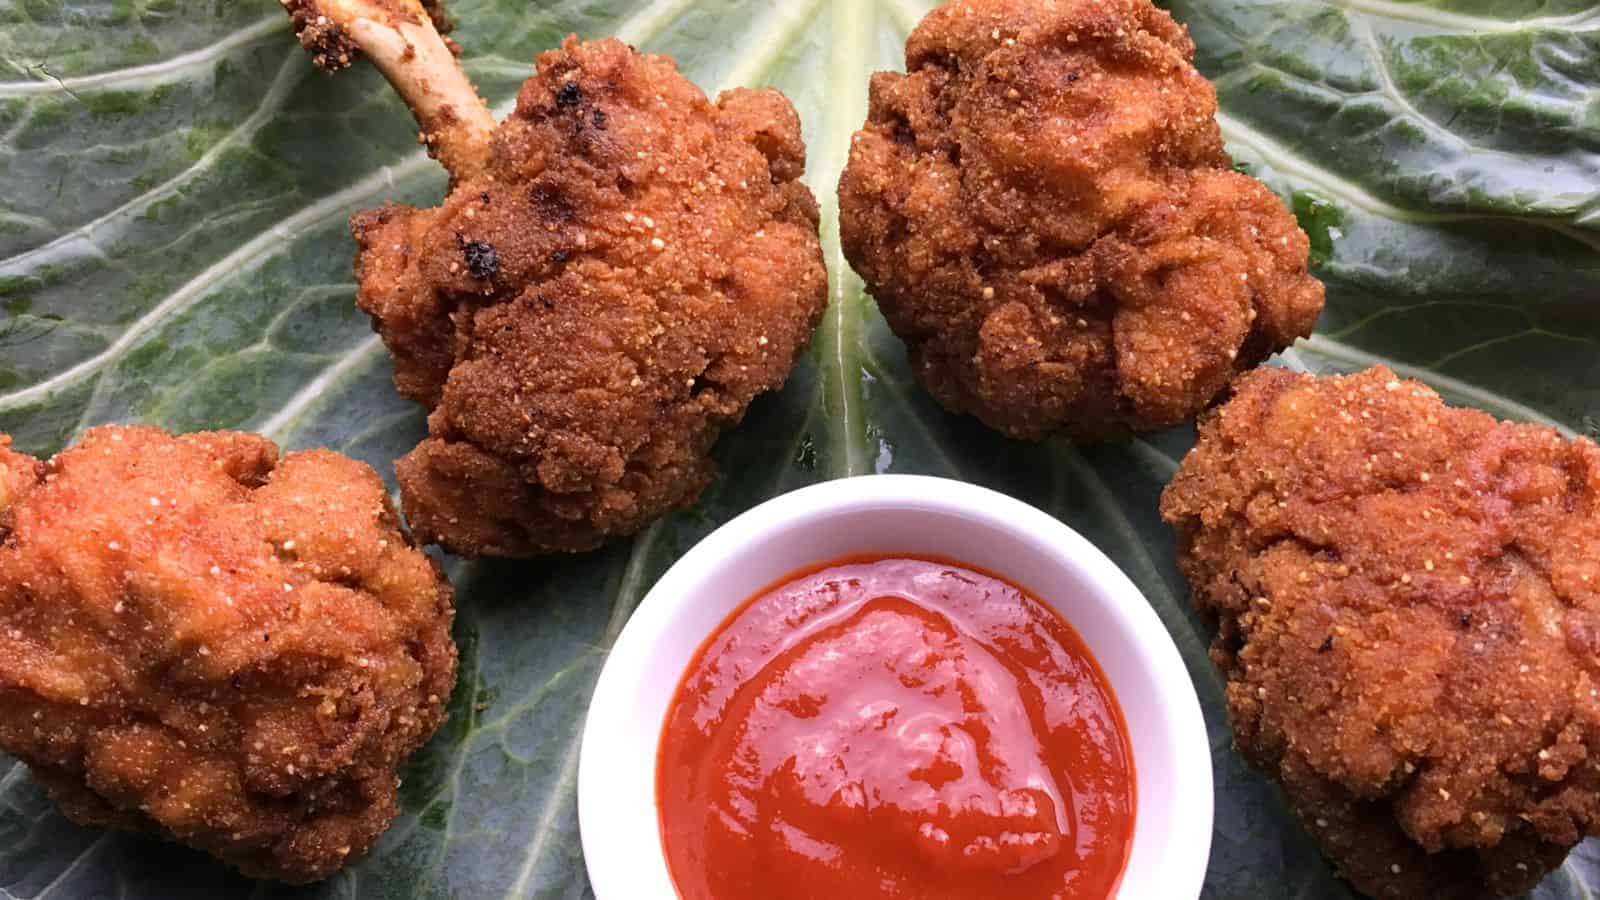 Four pieces of breaded, fried chicken arranged on green leaves with a small white bowl of red dipping sauce in front of them.